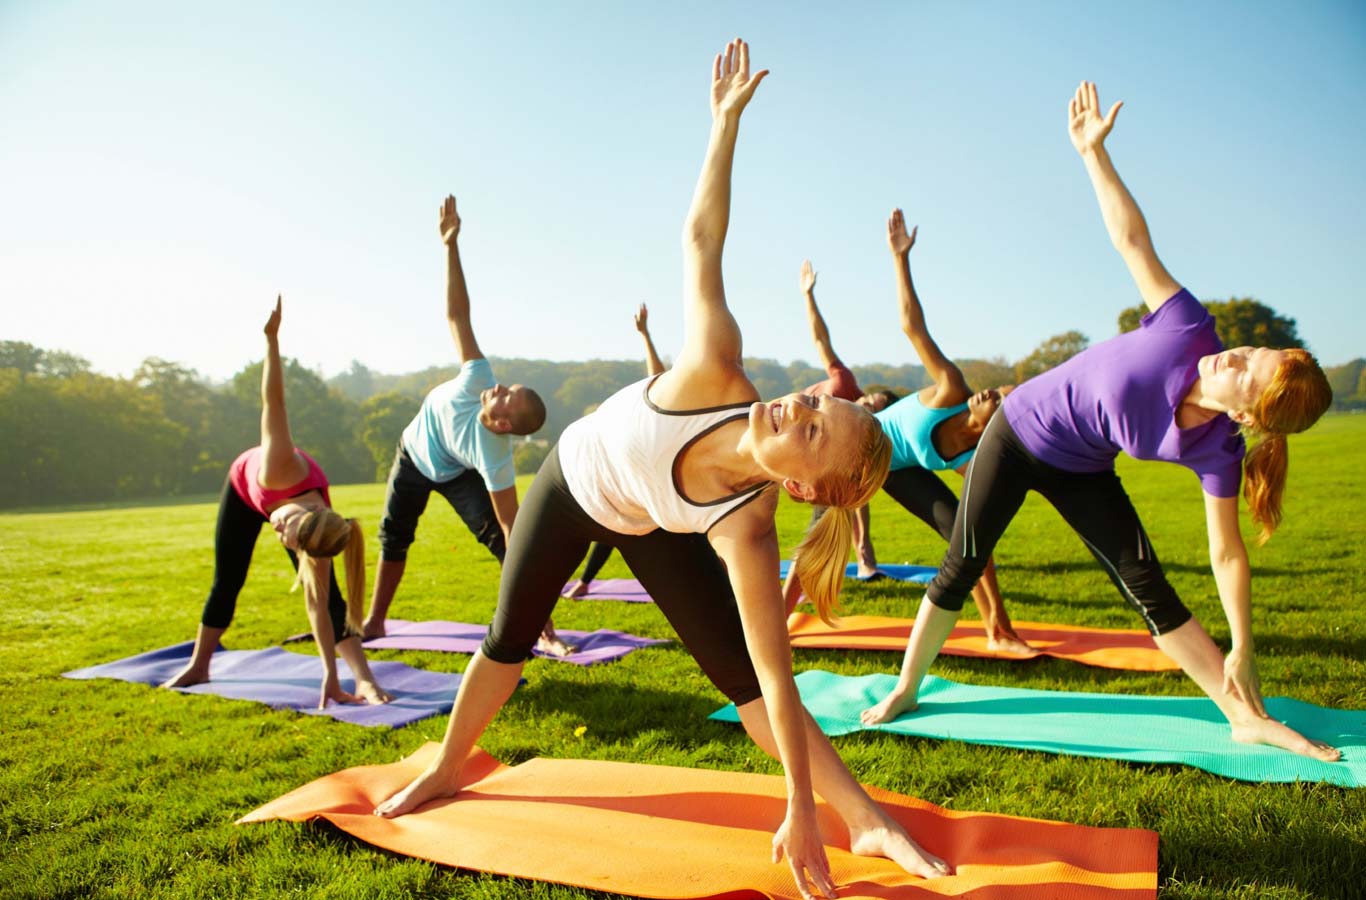 A picture of women doing yoga/fitness